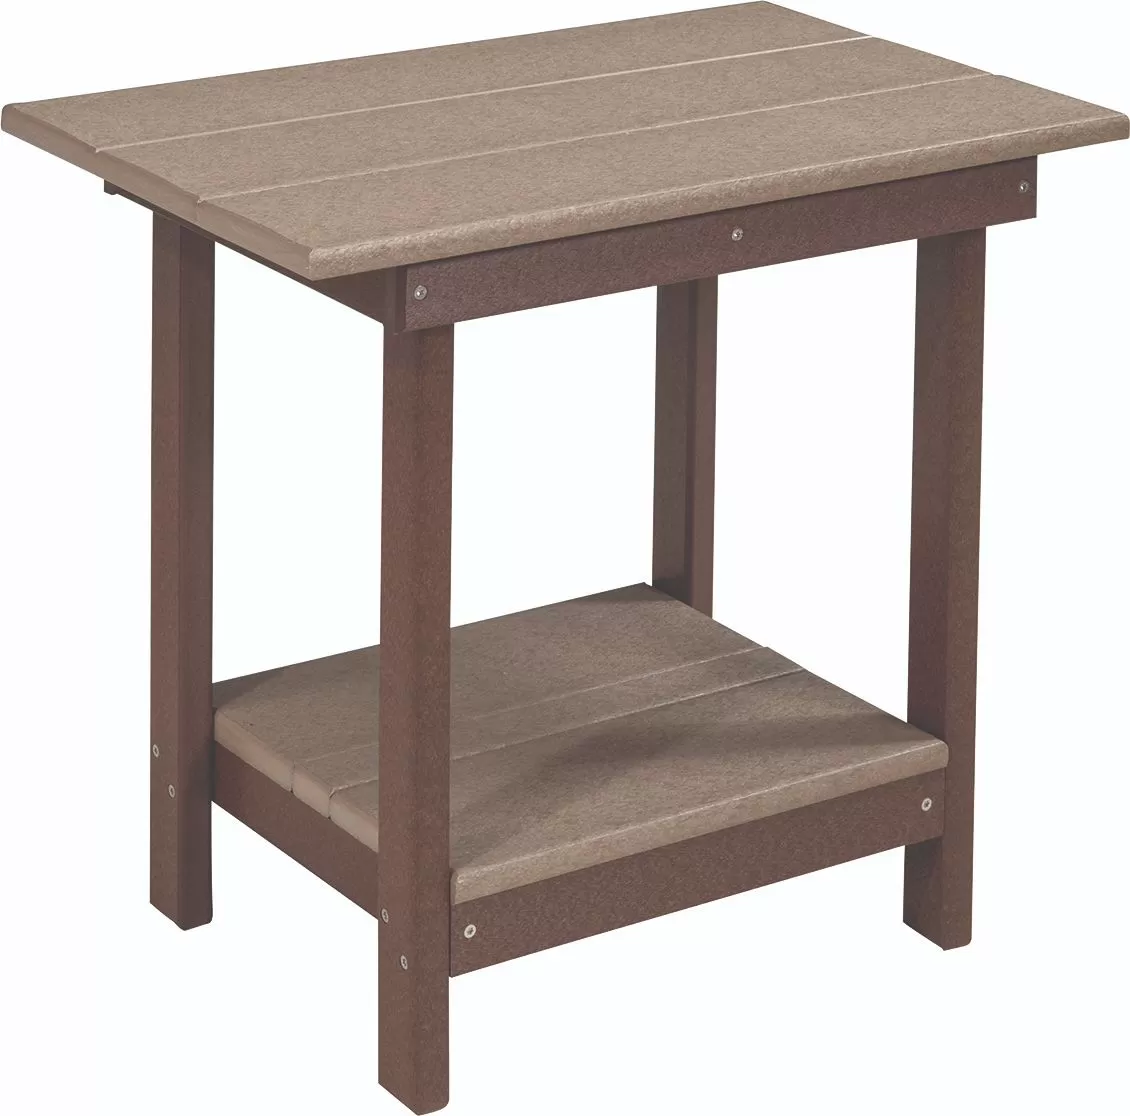 Square Deluxe End Table